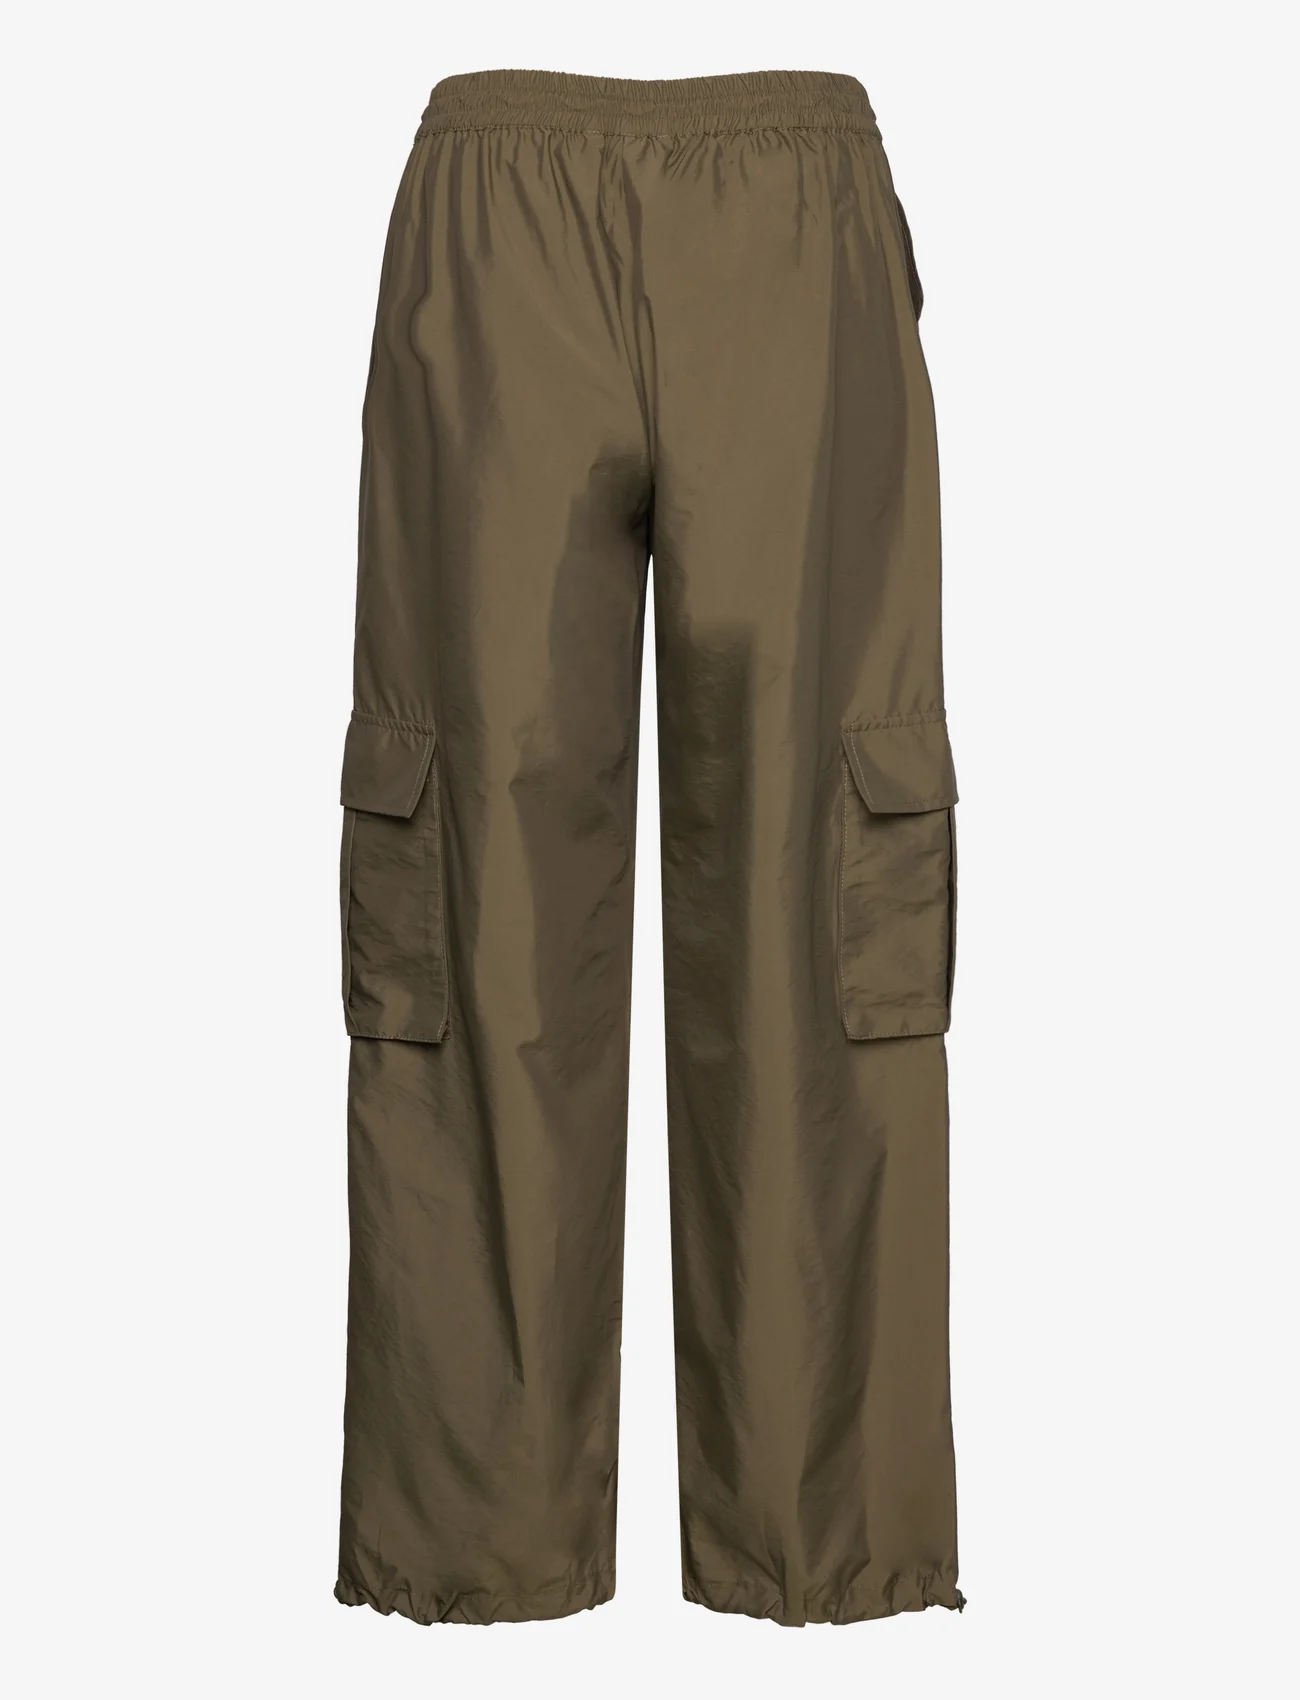 A-View - Cargo pants - cargo-housut - army - 1